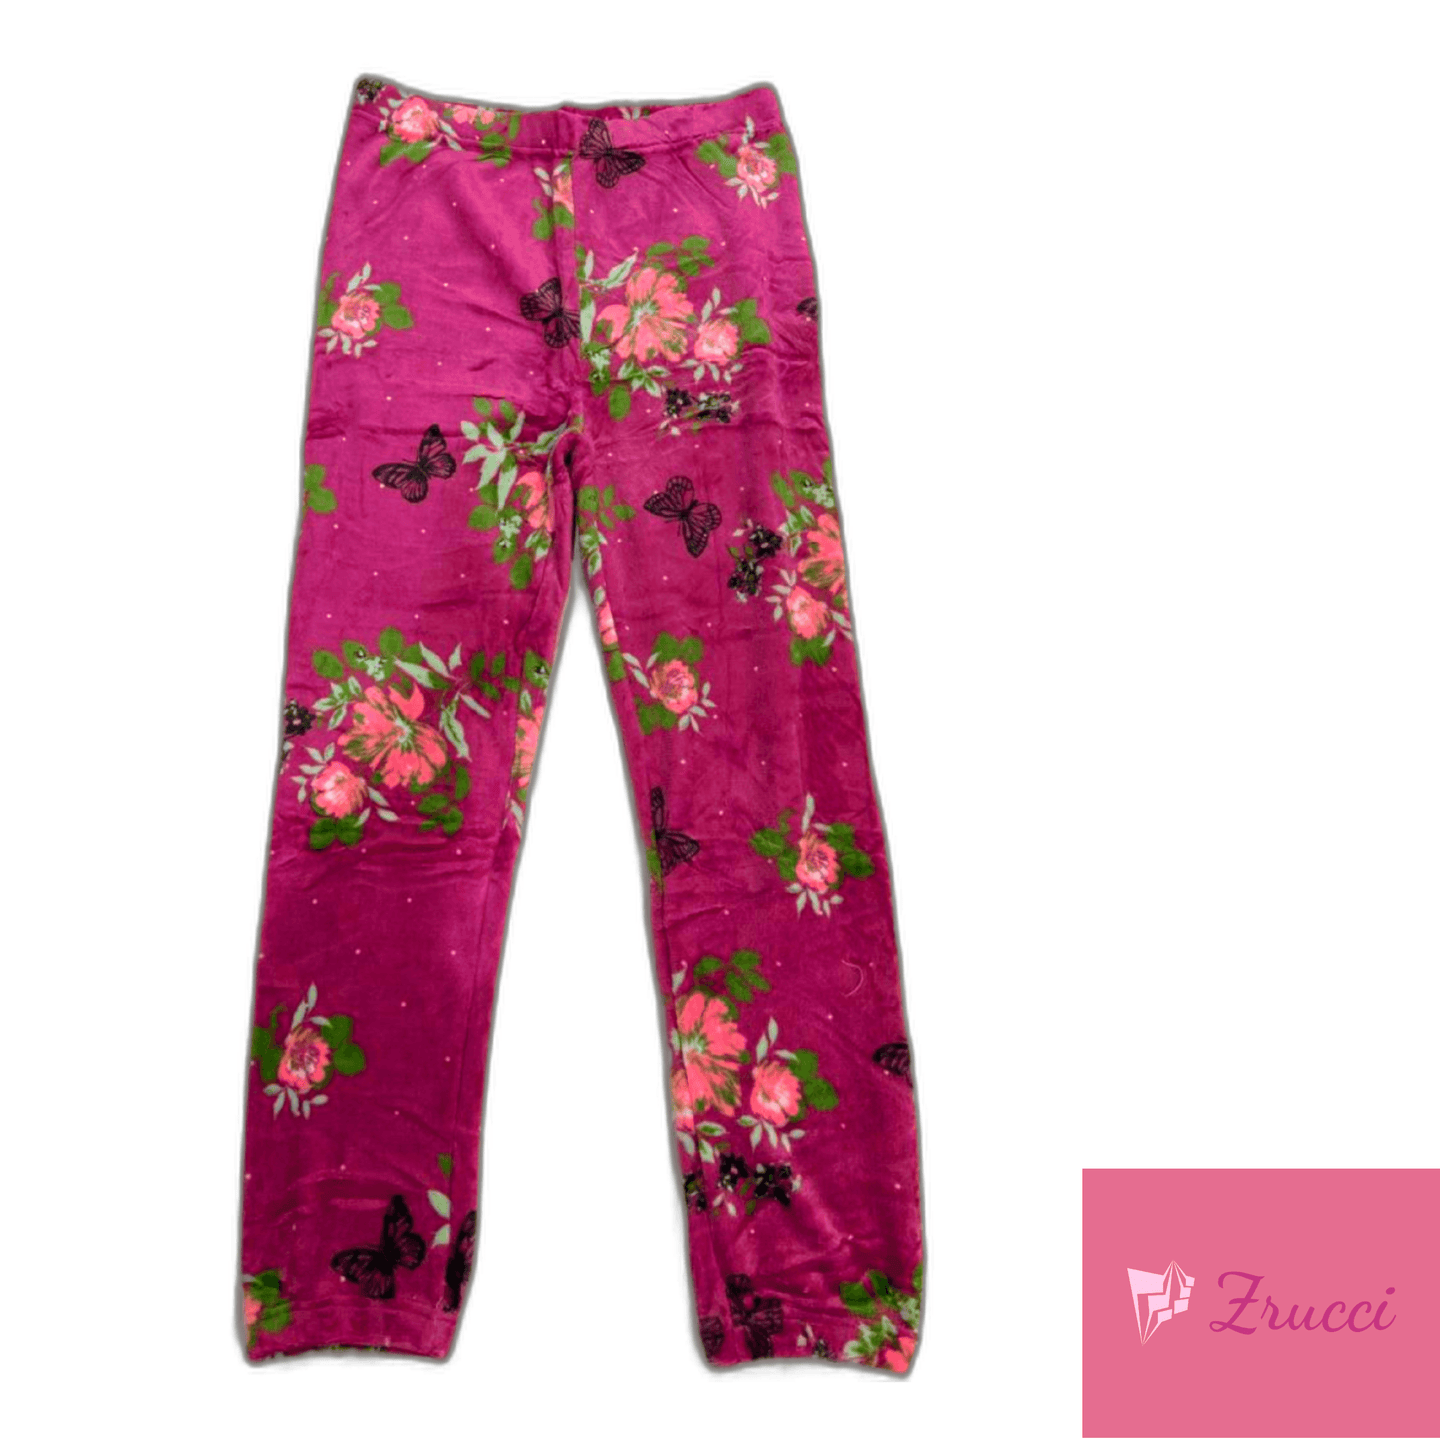 3 PACK! Women's Flower Ultra Plush Stretchy Cozy Pajama/Lounge Pants (Multiple Sizes and Colors) - PremiumBrandGoods